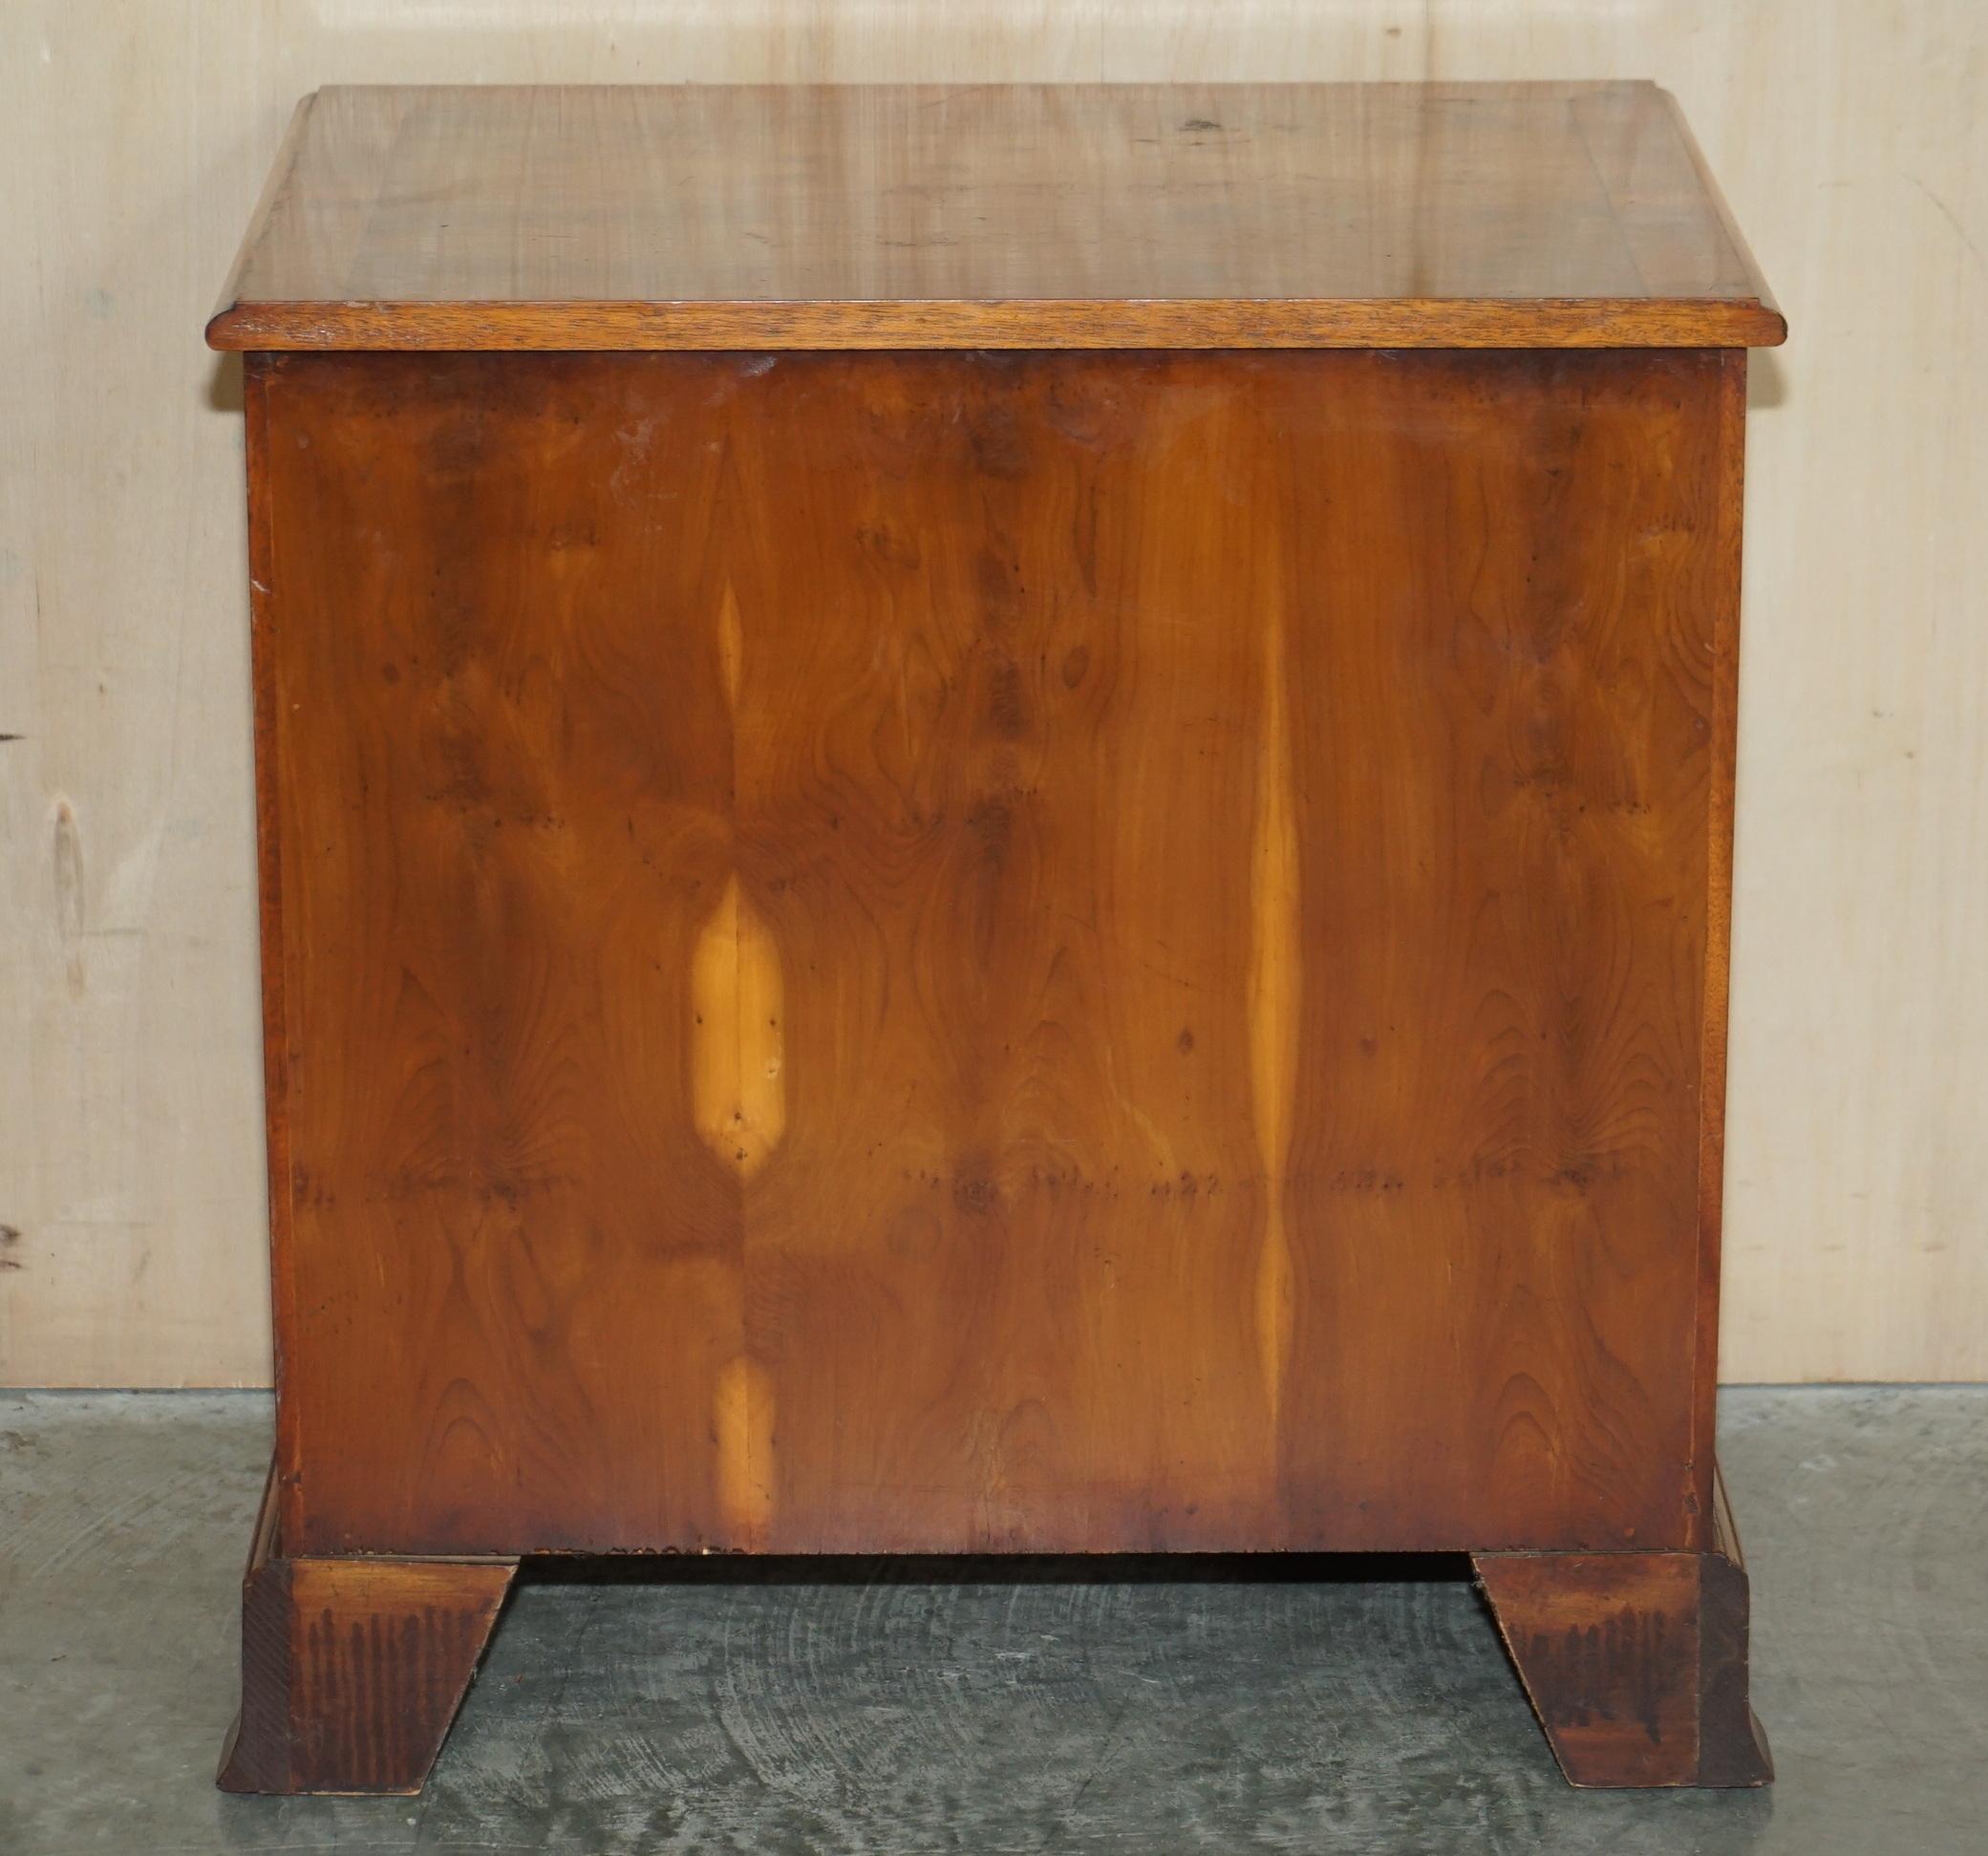 Vintage Burr Yew Wood Bedside / Side End Table Drawers with Butlers Serving Tray For Sale 11